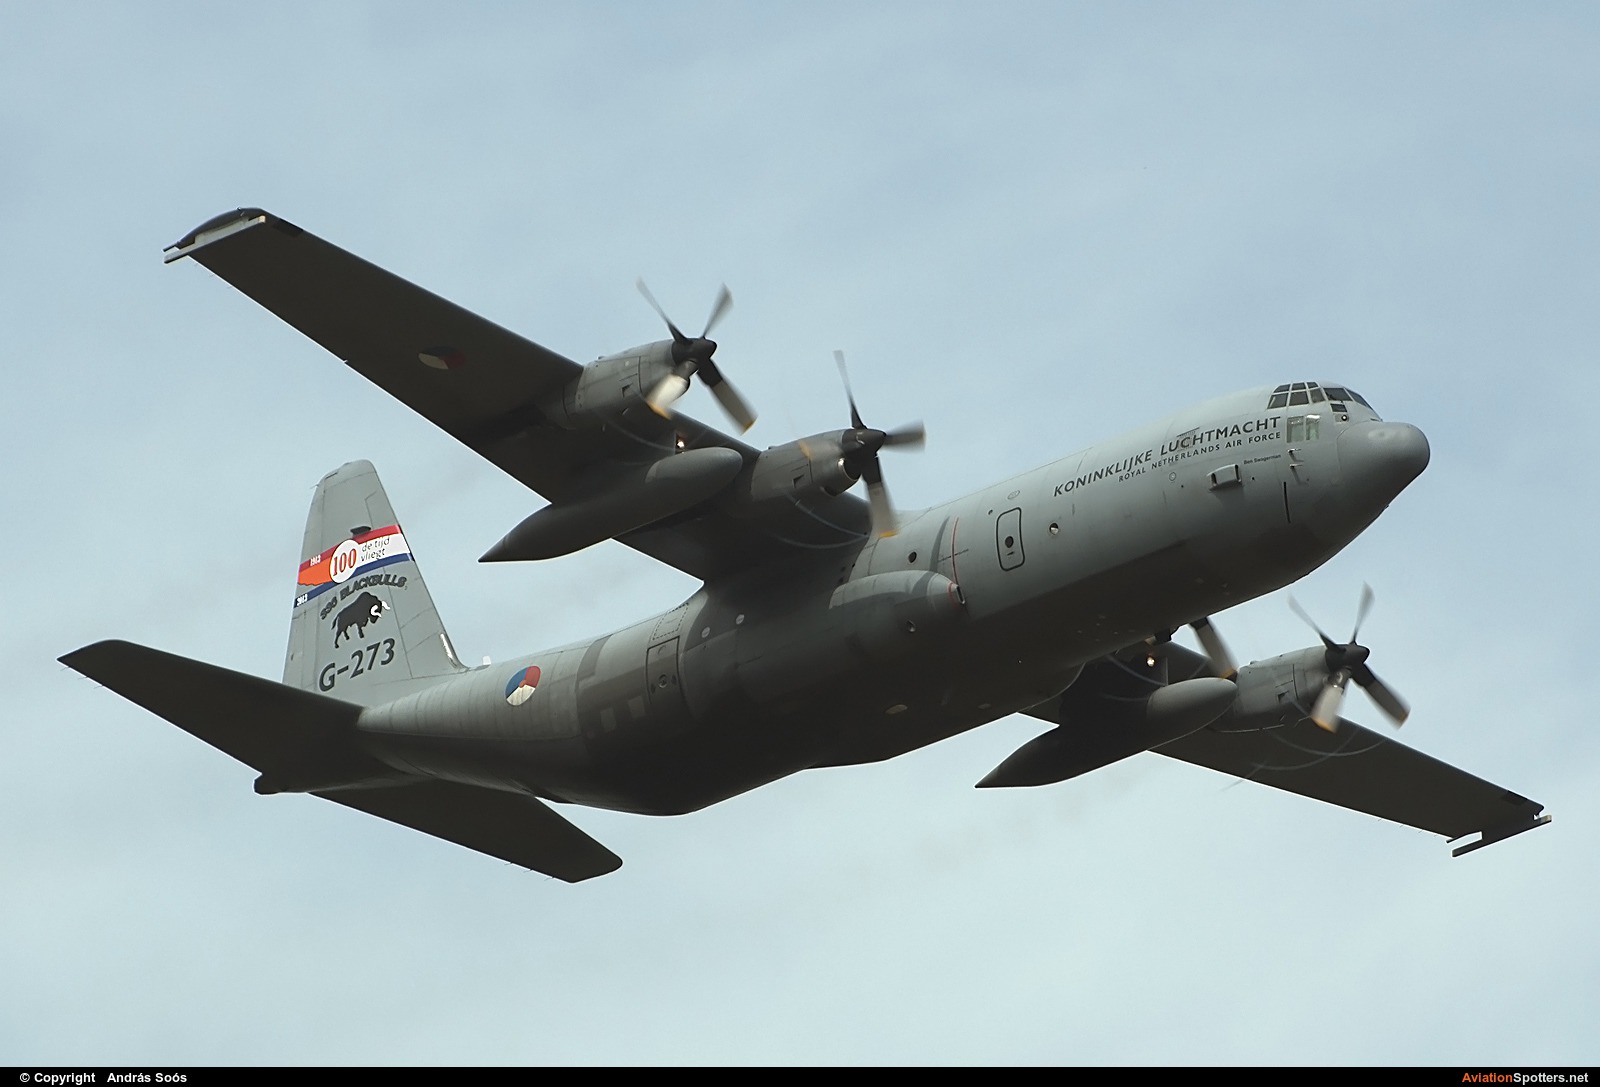 Netherlands - Air Force  -  C-130H Hercules  (G-273) By András Soós (sas1965)